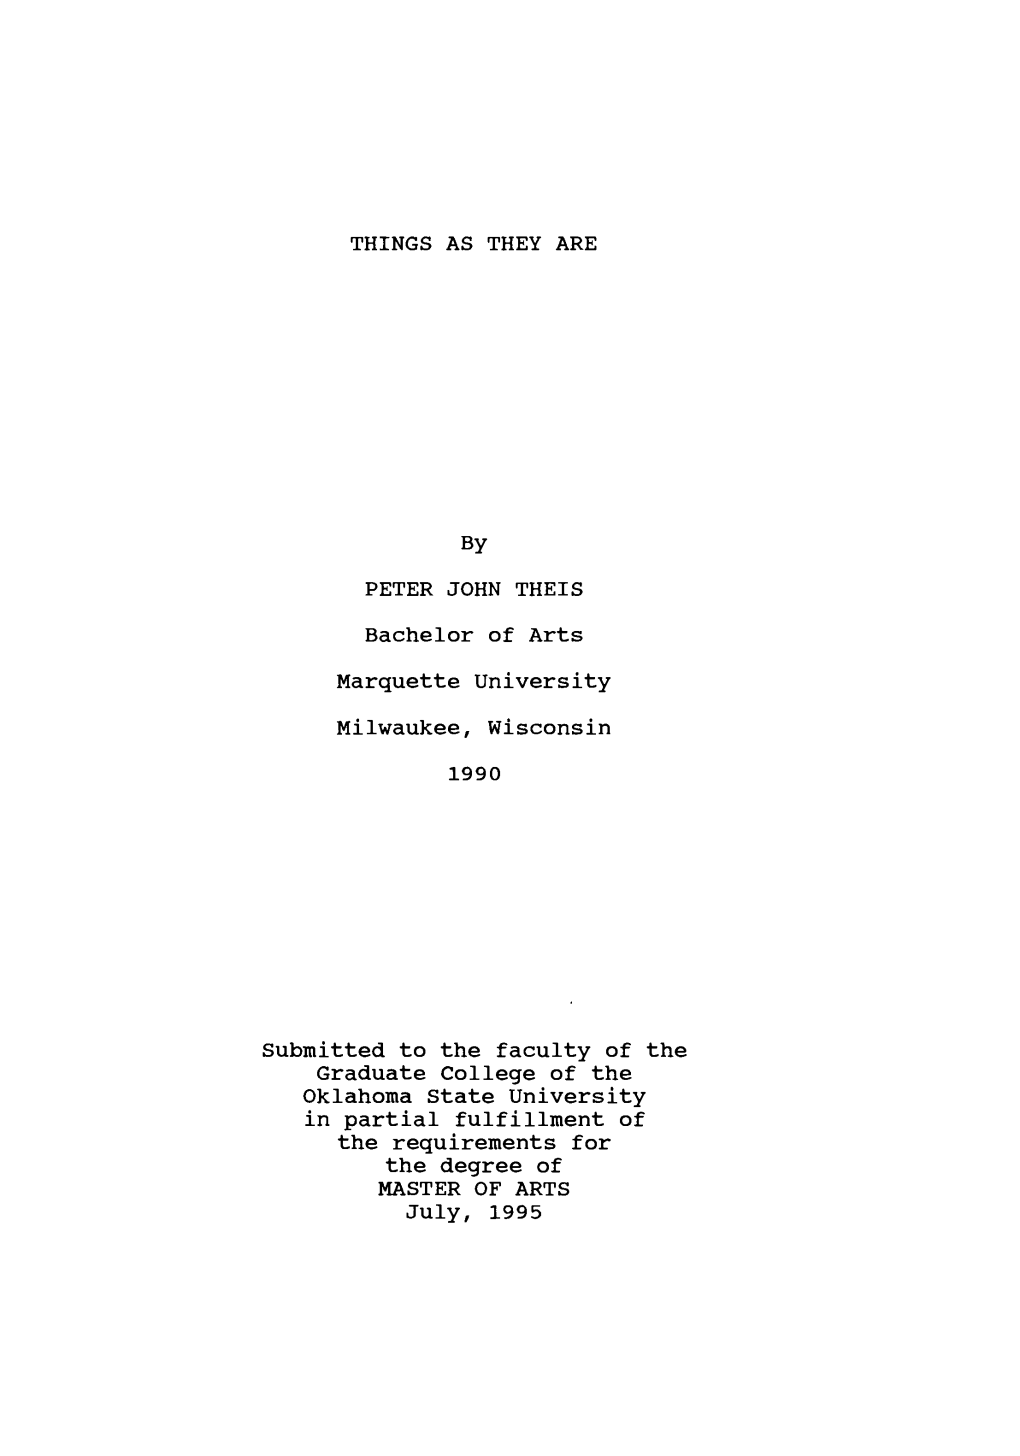 THINGS AS THEY ARE by PETER JOHN THEIS Bachelor of Arts Marquette University Milwaukee, Wisconsin 1990 Submitted to the Faculty